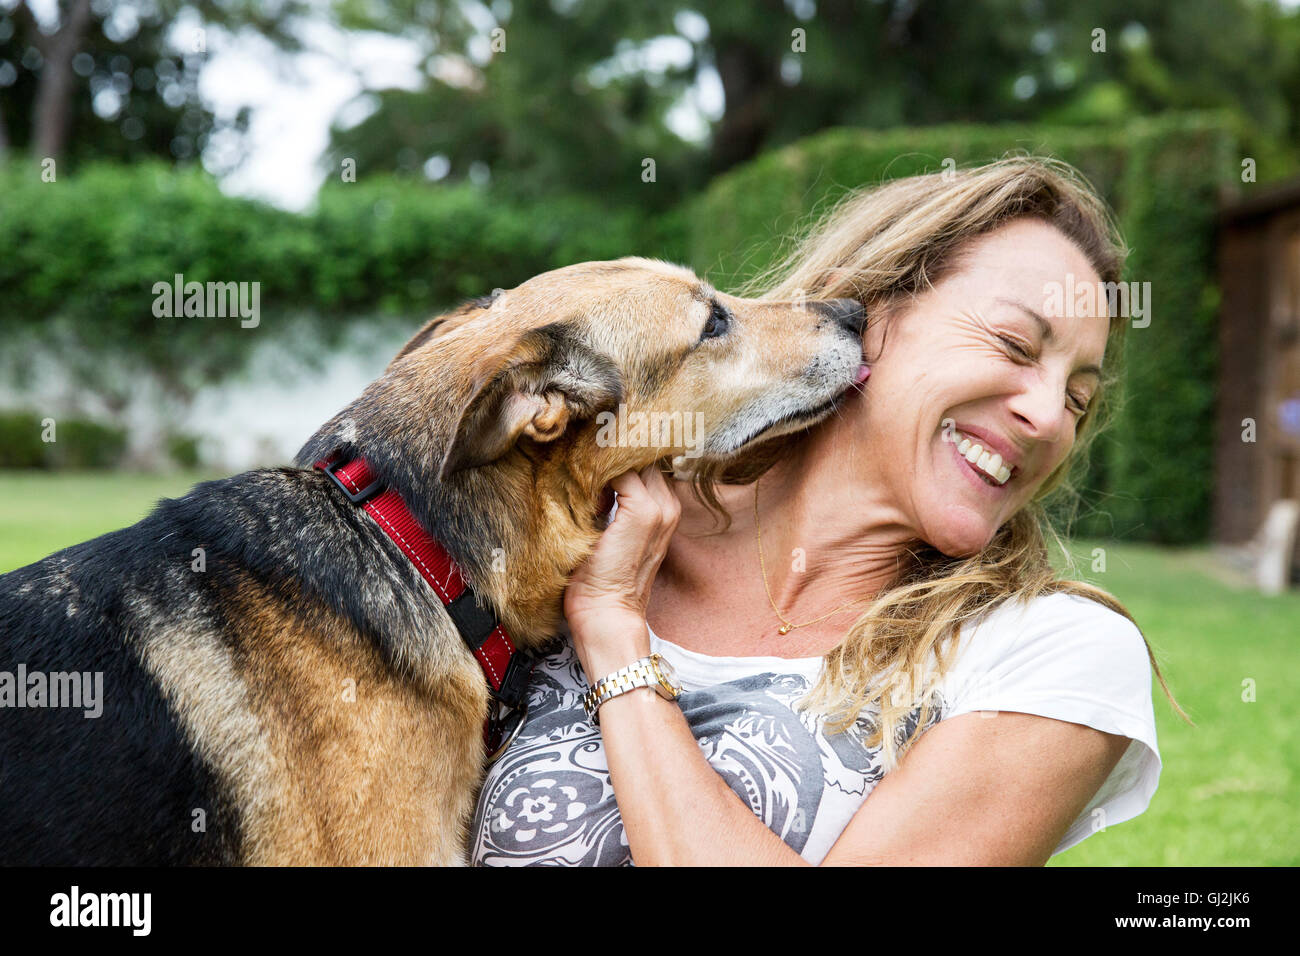 Mature woman in park with dog, dog licking woman's face Stock Photo